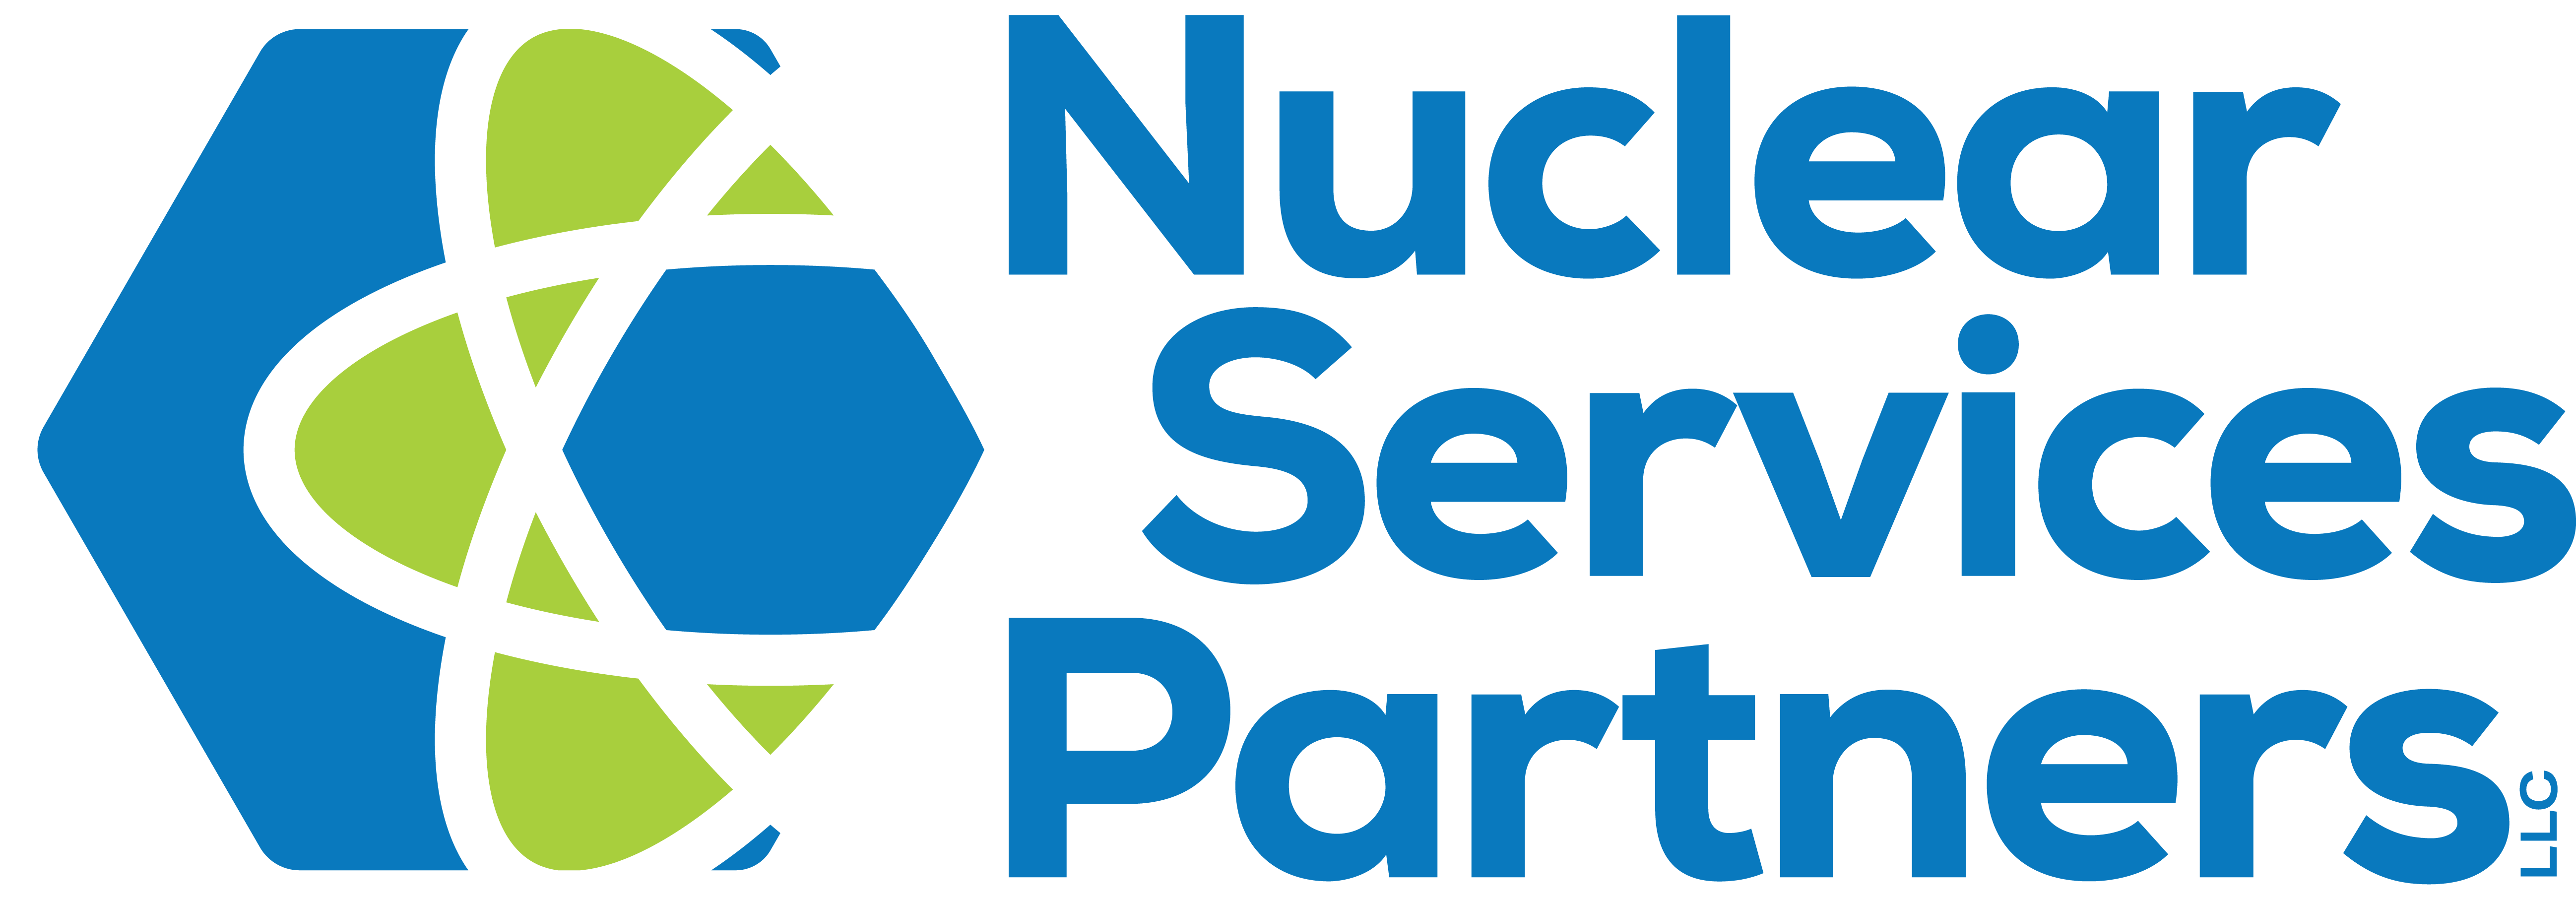 Nuclear Services Partners